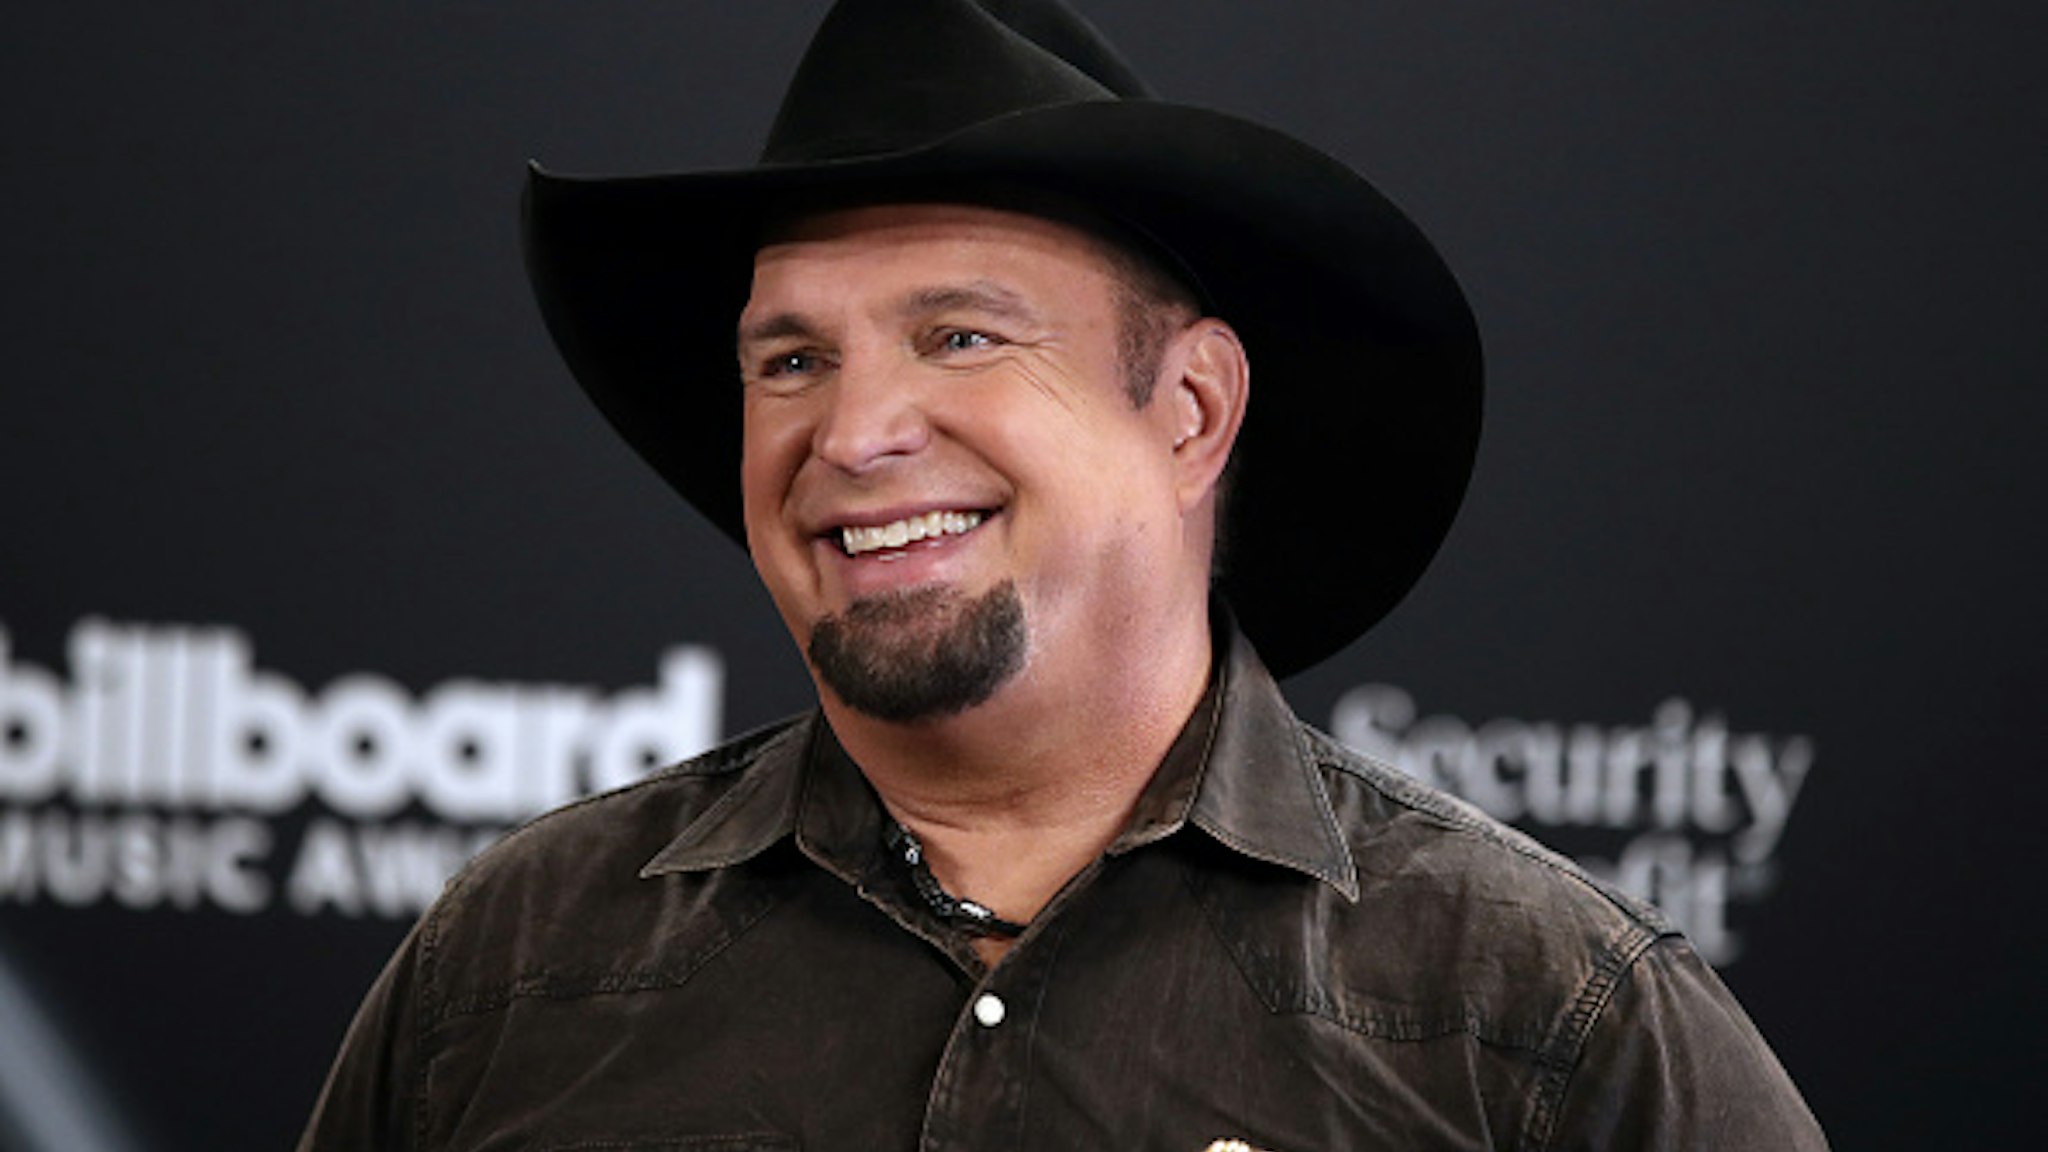 BILLBOARD MUSIC AWARDS -- Backstage -- 2020 BBMA at the Dolby Theater, Los Angeles, California -- Pictured: In this image released on October 14, honoree Garth Brooks attends the 2020 Billboard Music Awards, broadcast on October 14, 2020 at the Dolby Theatre in Los Angeles, California. --